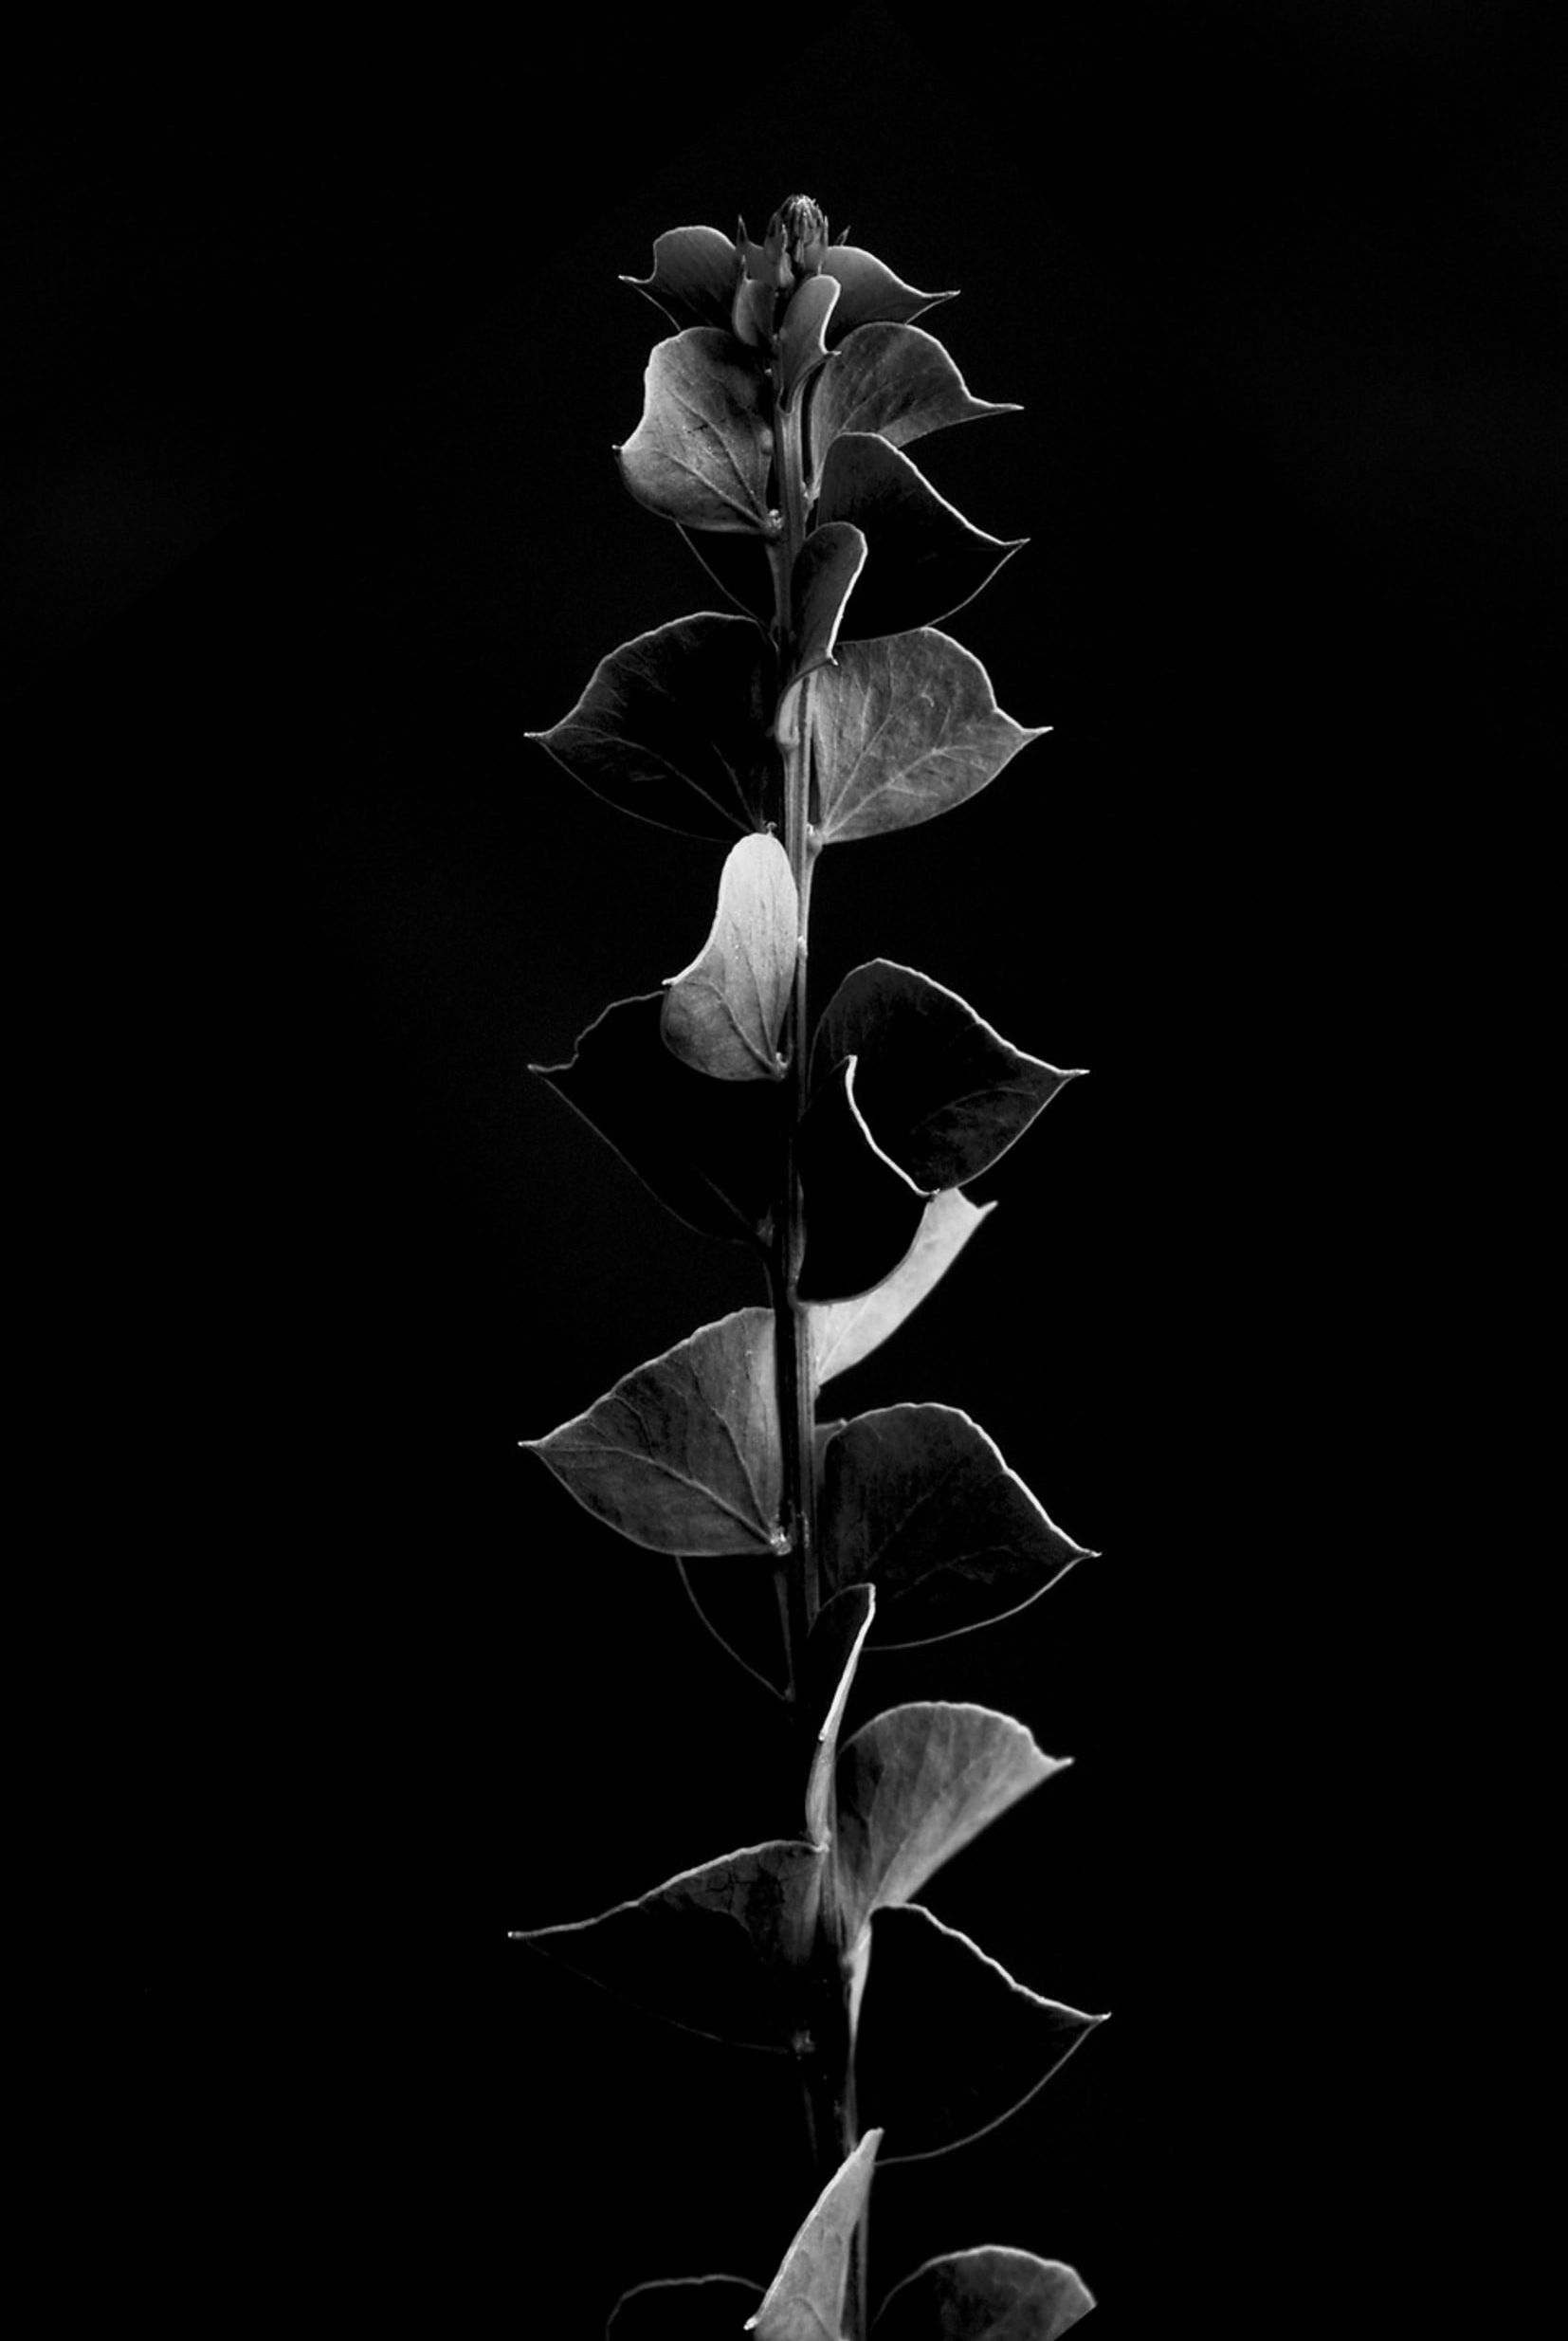 Black and white photograph of a tall upright plant or flower, with single leaves up the length of the stem.